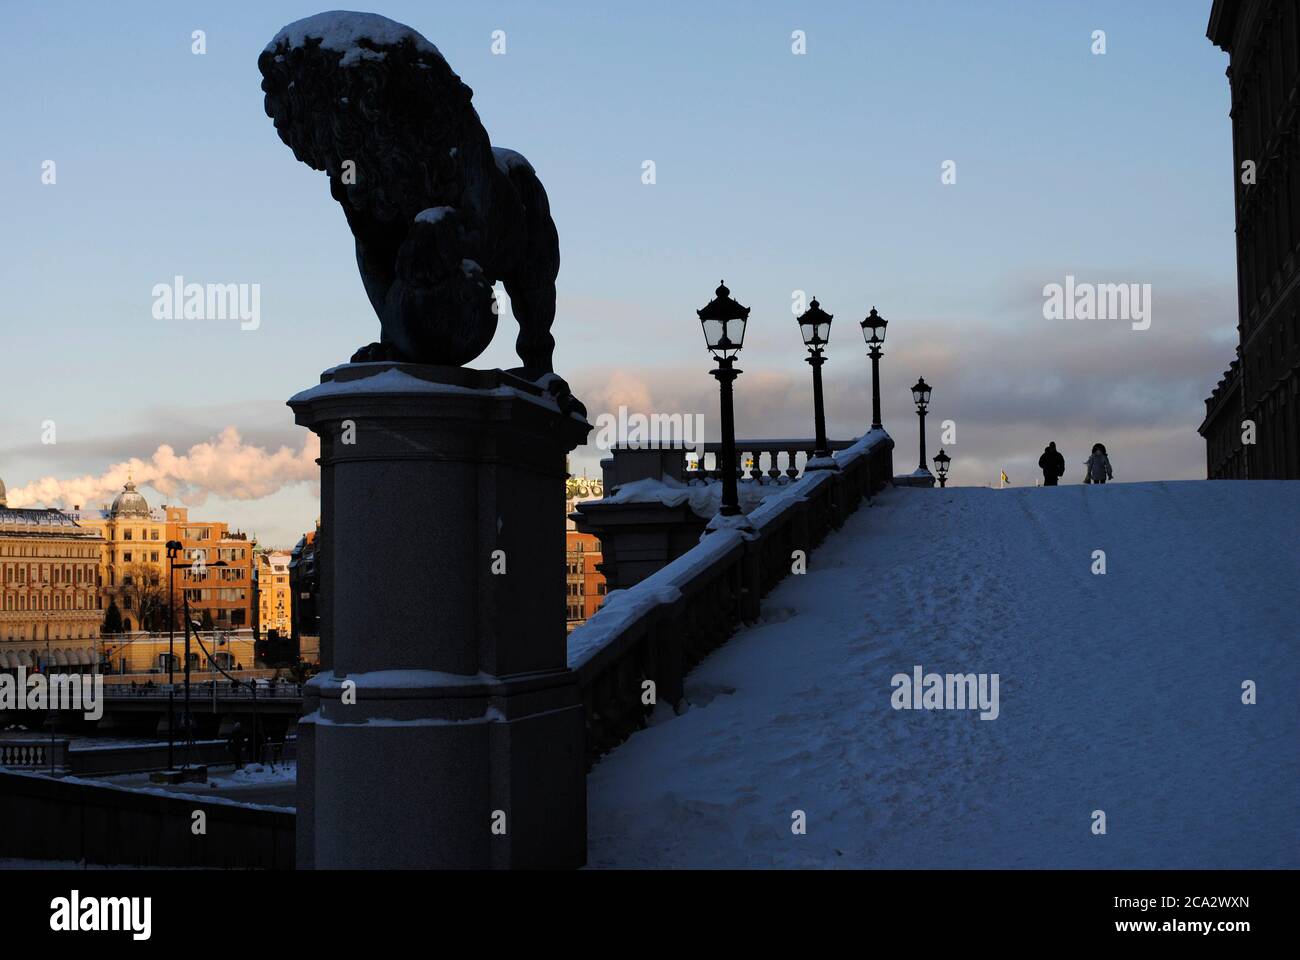 Winter landscape. Statue of a lion outside the Royal Palace. Stockholm. Sweden. Stock Photo